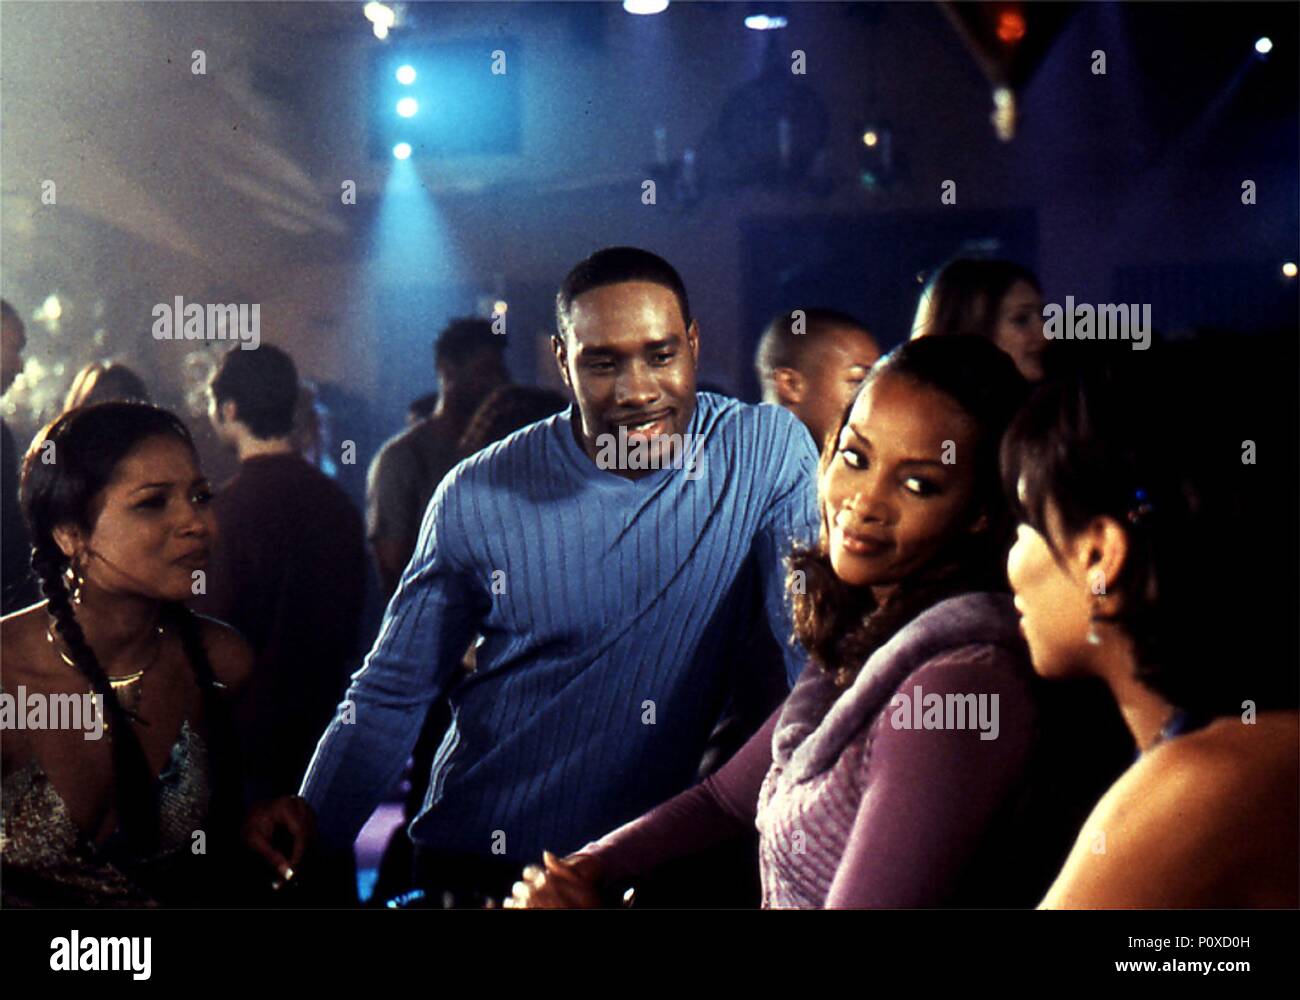 Original Film Title: TWO CAN PLAY THE GAME.  English Title: TWO CAN PLAY THE GAME.  Film Director: MARK BROWN.  Year: 2001.  Stars: MORRIS CHESTNUT; VIVICA A. FOX; TAMALA JONES. Credit: COLUMBIA PICTURES / Album Stock Photo